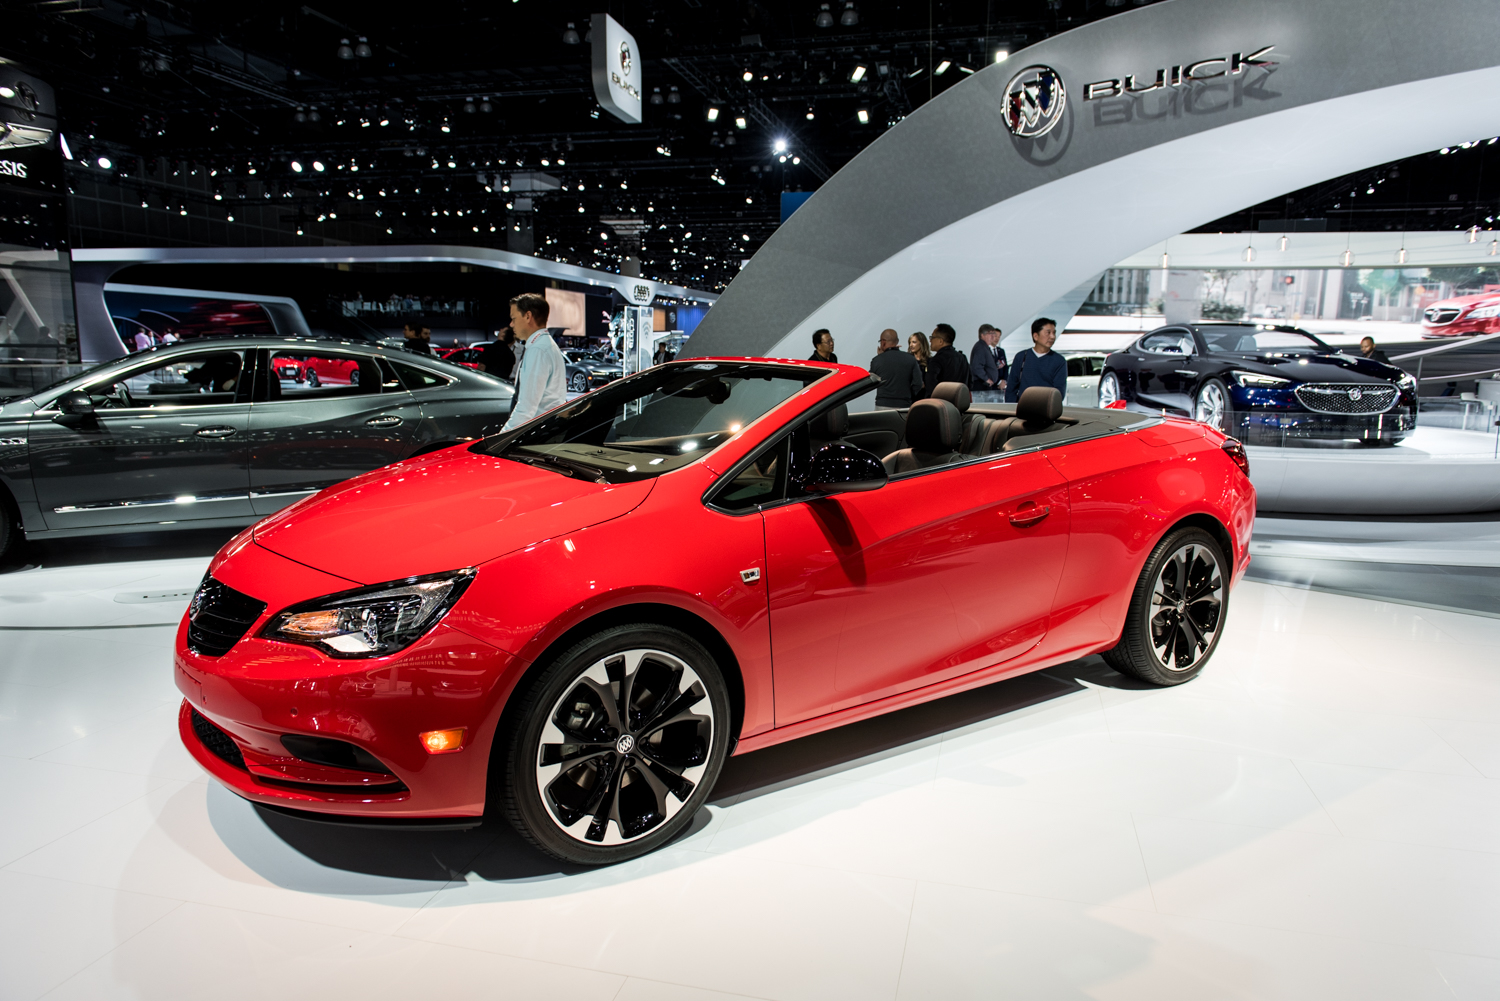 Buick Incentives: 2018 Cascada Offered At 20% Below MSRP | GM Authority